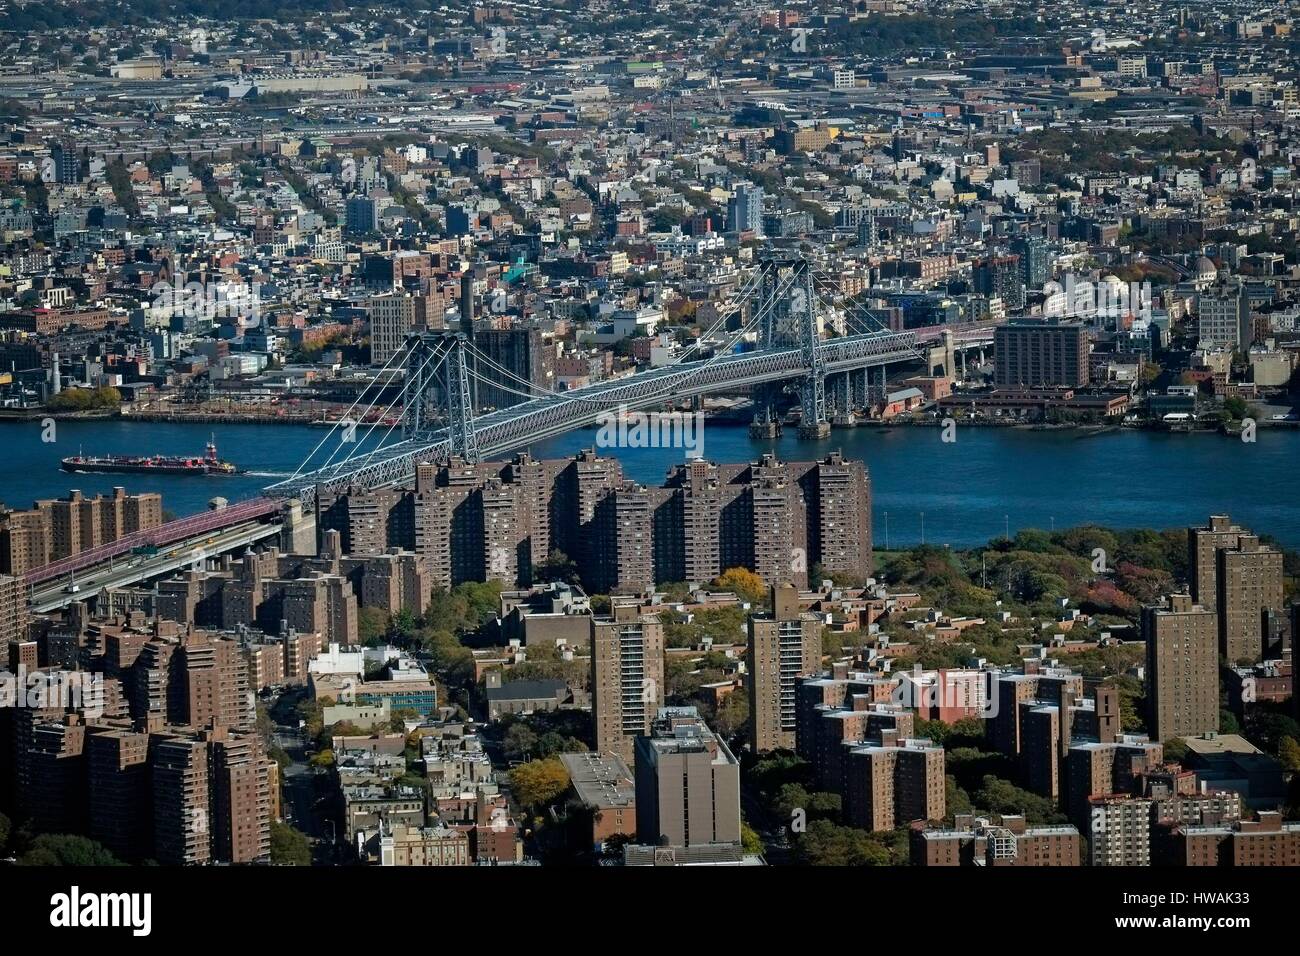 United States, New York, Manhattan, view of New York from the One World Trade Center or 1 WTC 1 or WTC, Williamsburg Bridge Stock Photo